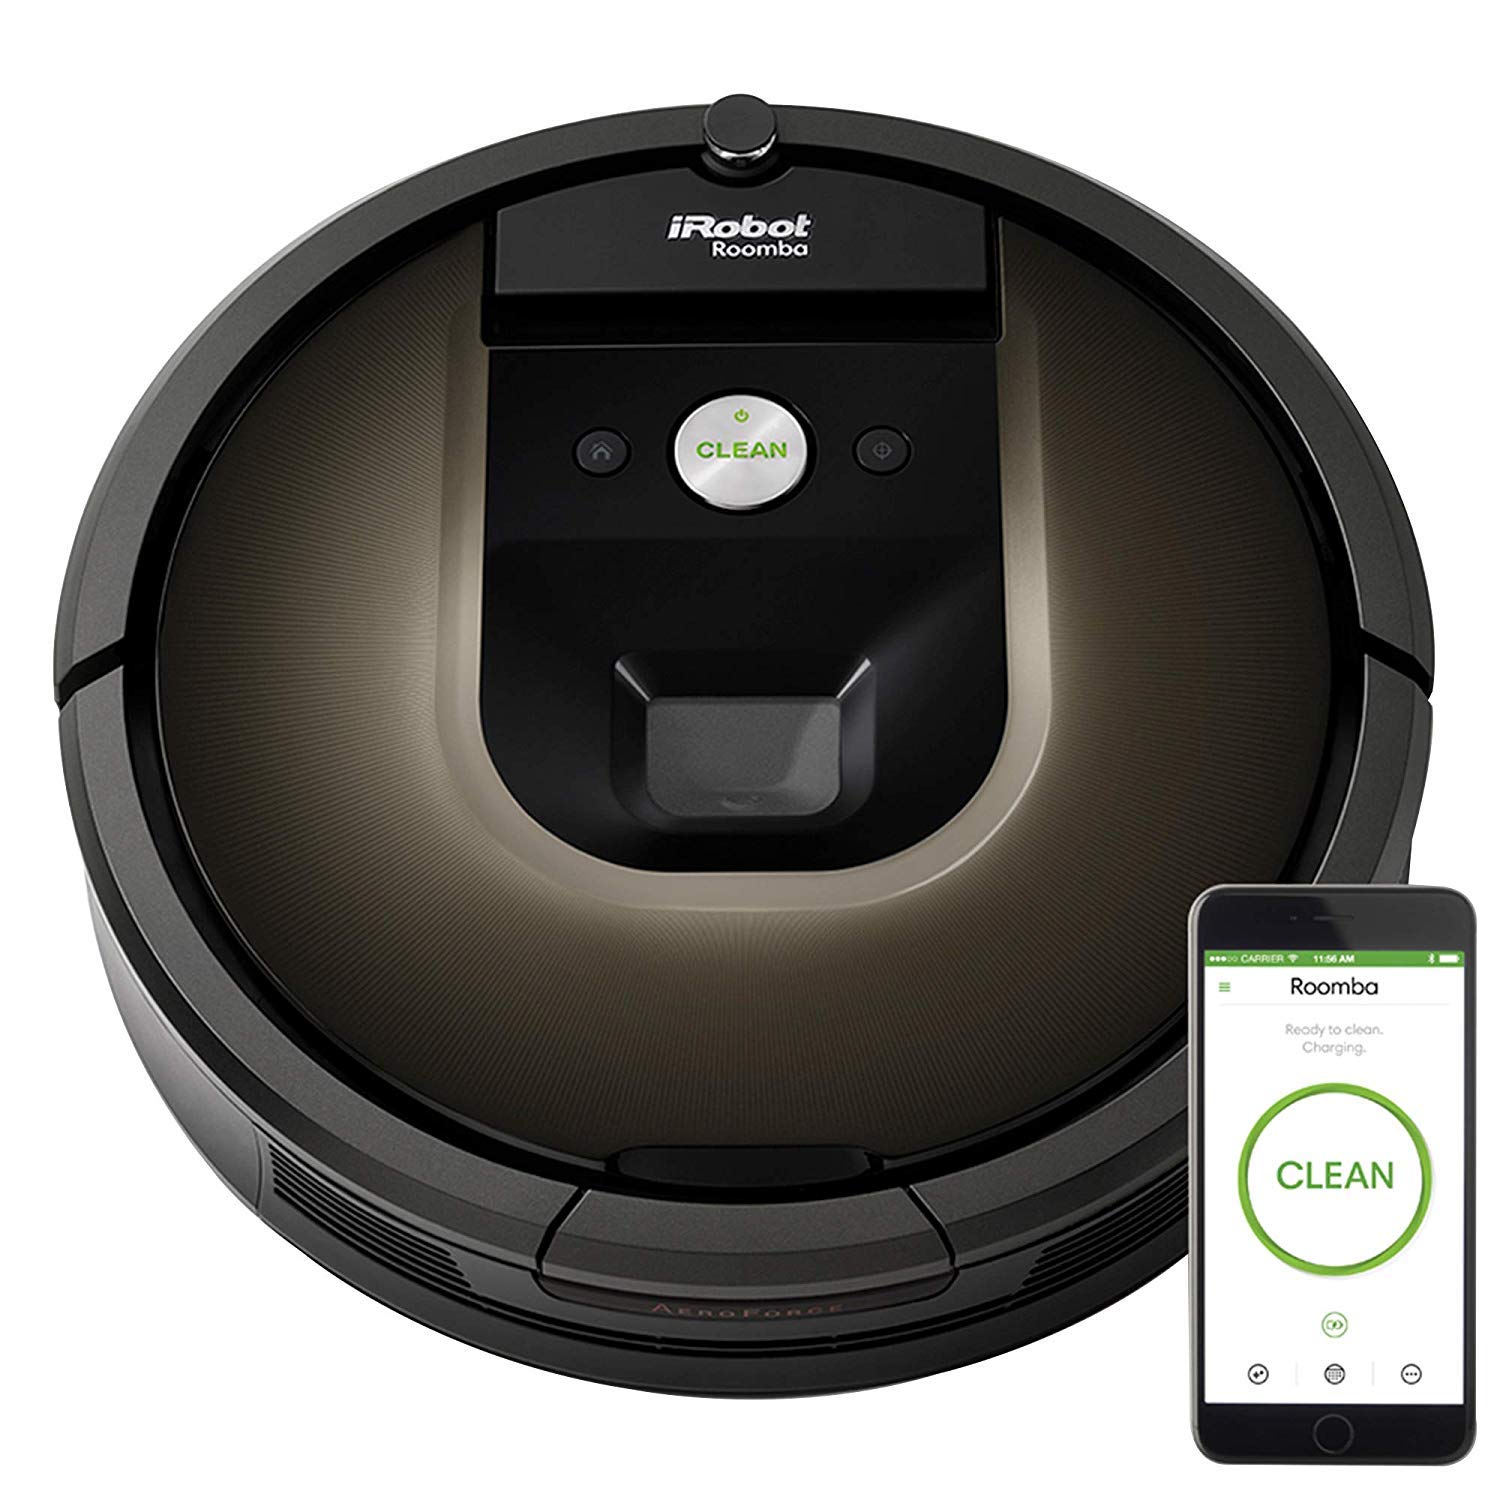 iRobot Roomba 980 Robot Vacuum-Wi-Fi Connected Mapping, Works with Alexa, Ideal for Pet Hair, Carpets, Hard Floors, Power Boost Technology, Black (Renewed)